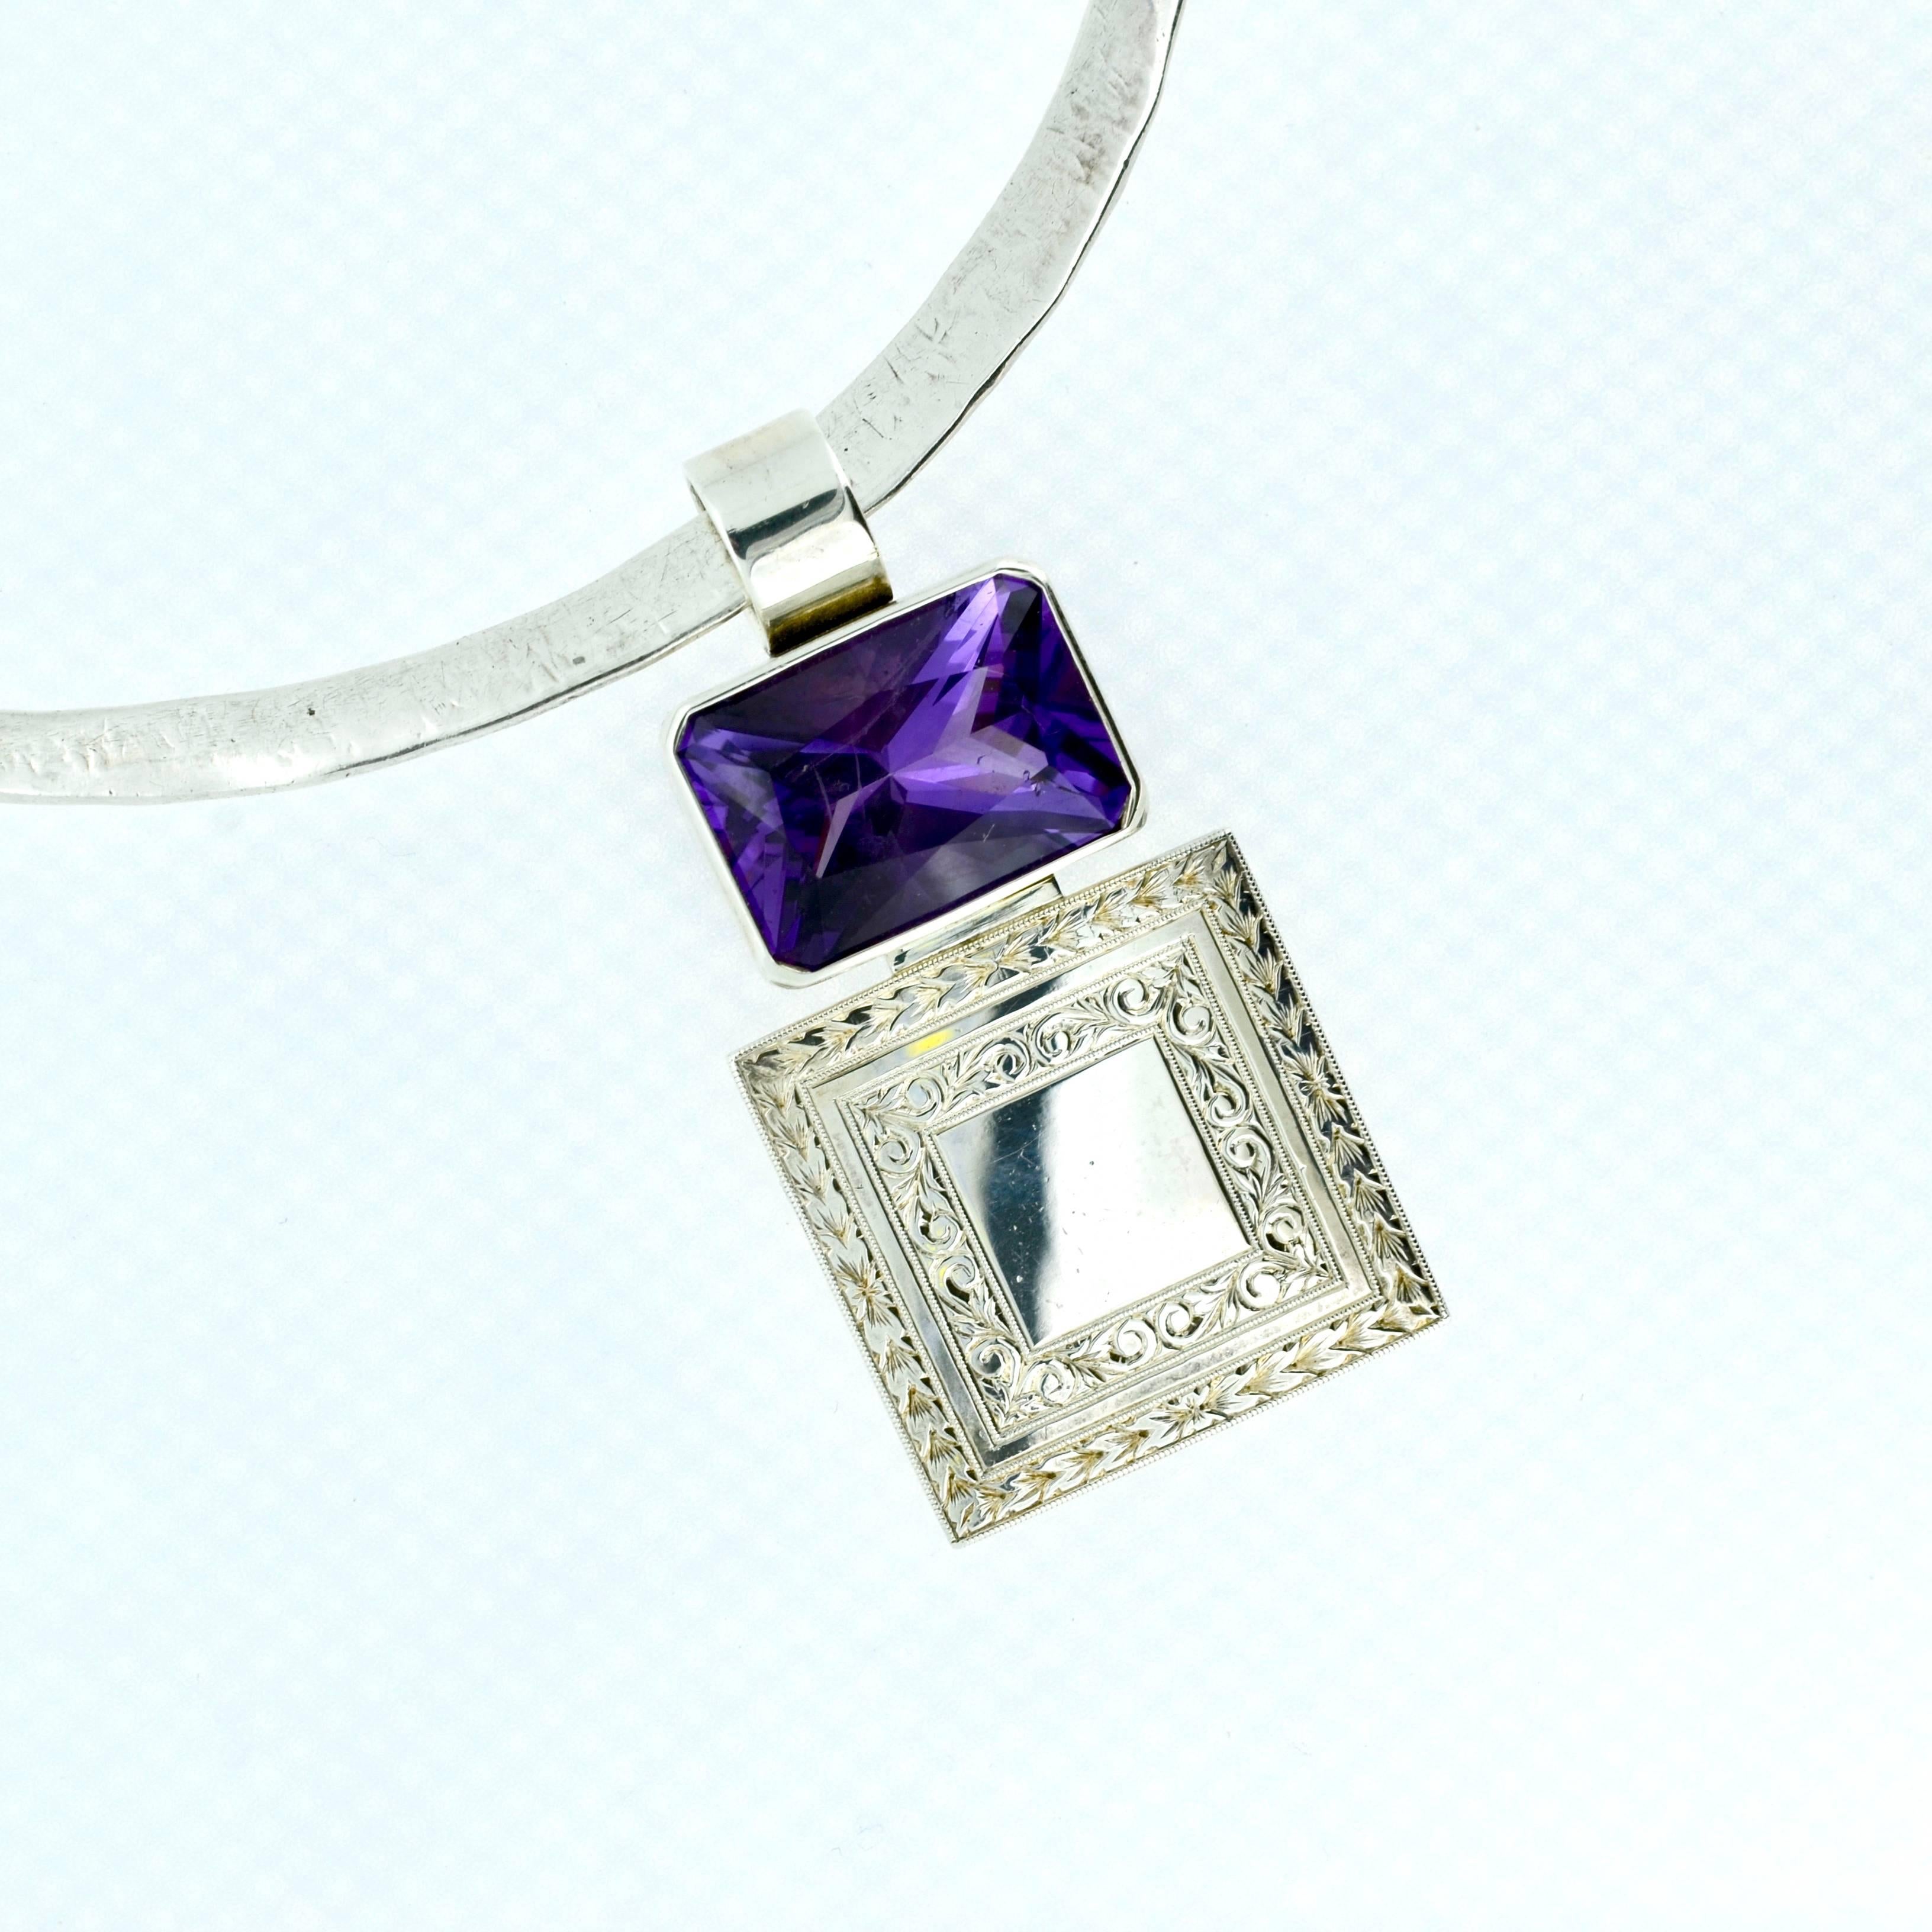 Hand fabricated one of a kind hand engraved sterling silver neck piece. Collar is hand hammered and sculpted approximately 16 inches. Neckpiece is hand engraved one inch square. Beautiful faceted 18mmX16mm Amethyst is bezel set with 6.5mm heavy